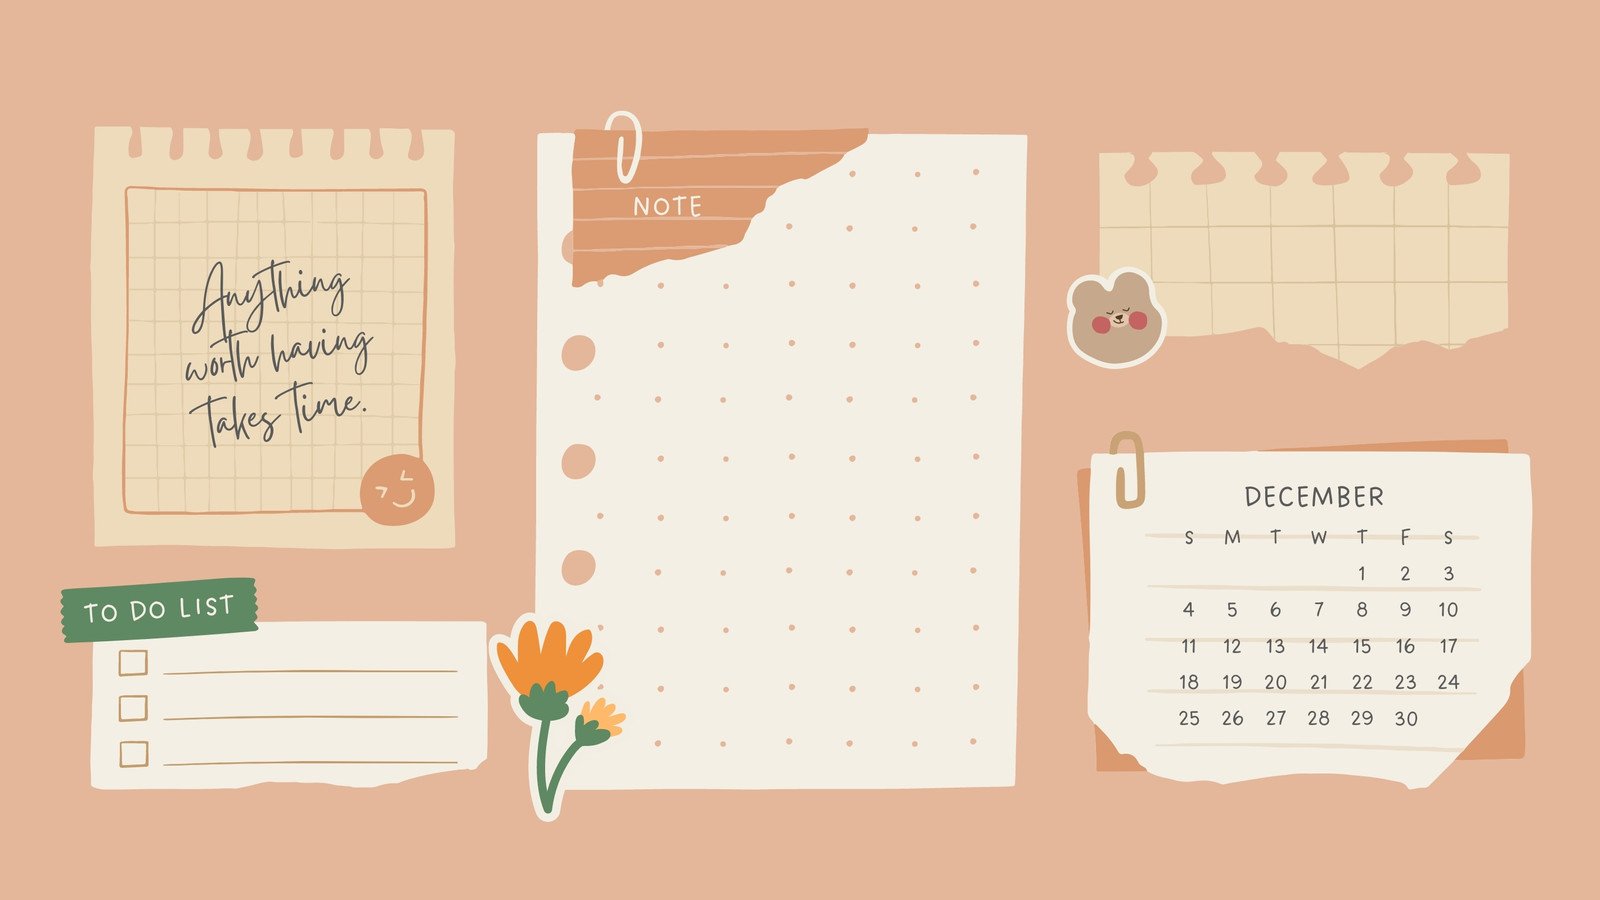 Page 3 - Free and customizable spring desktop wallpaper templates